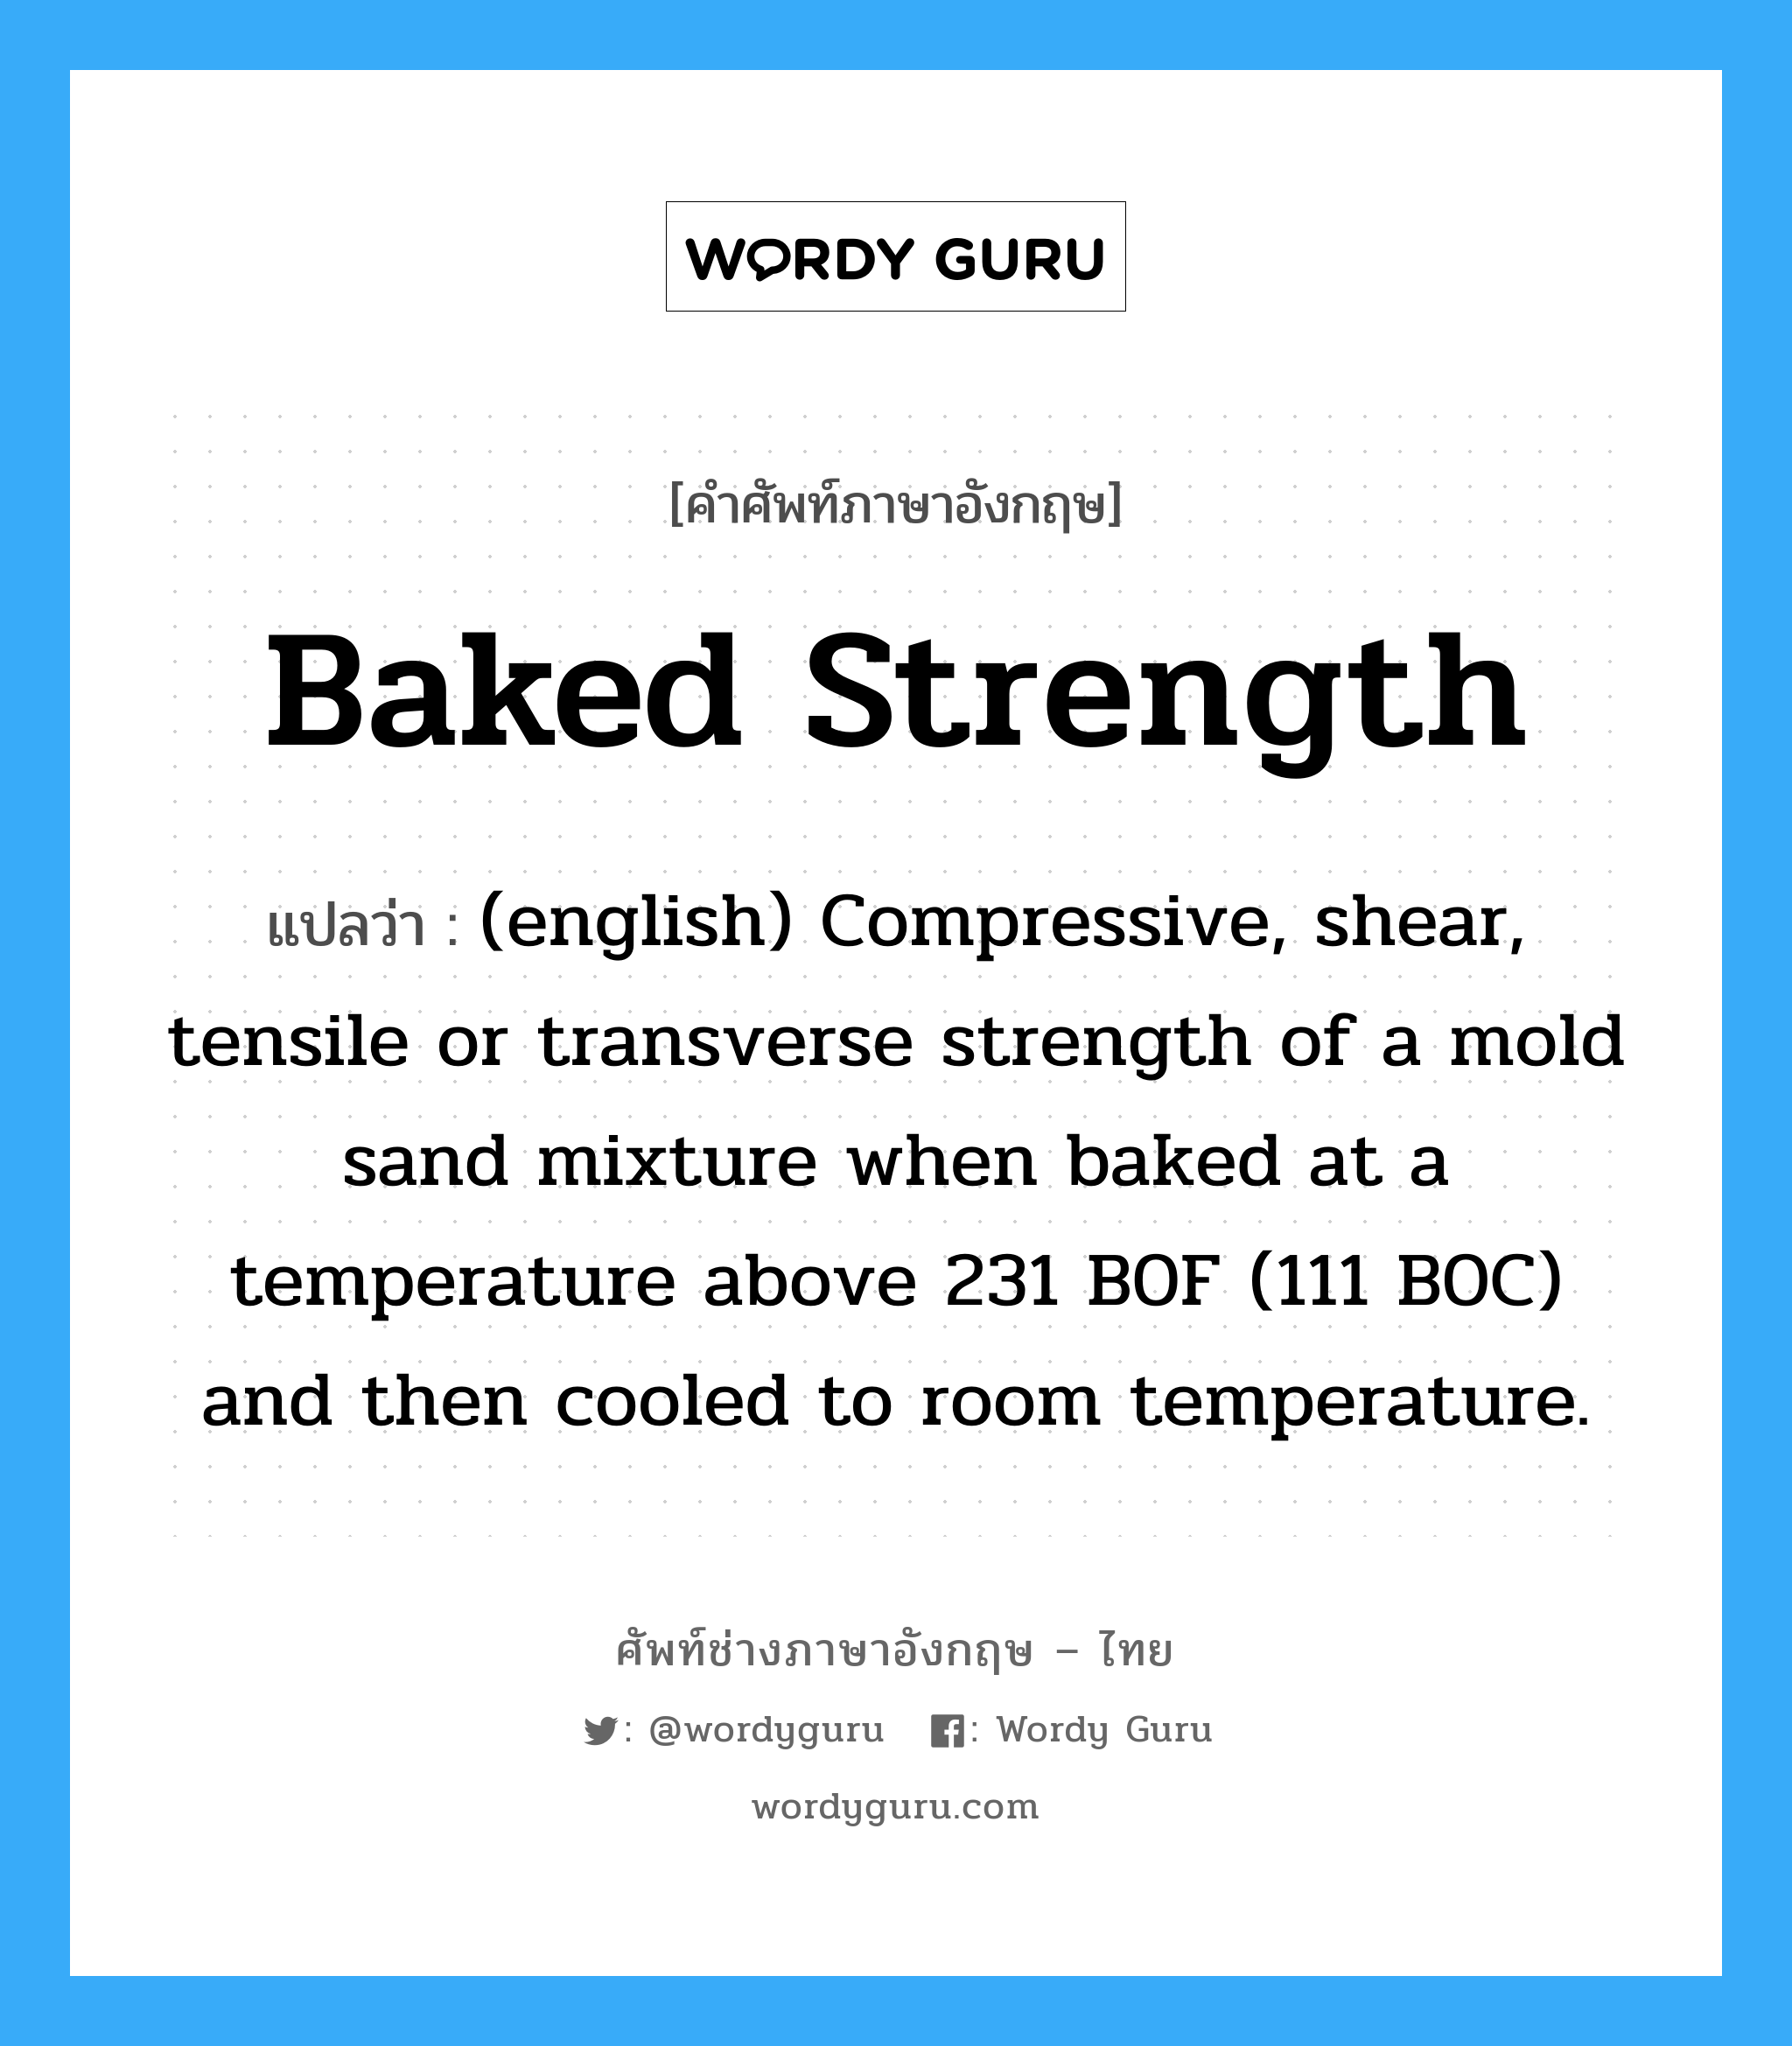 (english) Compressive, shear, tensile or transverse strength of a mold sand mixture when baked at a temperature above 231 B0F (111 B0C) and then cooled to room temperature. ภาษาอังกฤษ?, คำศัพท์ช่างภาษาอังกฤษ - ไทย (english) Compressive, shear, tensile or transverse strength of a mold sand mixture when baked at a temperature above 231 B0F (111 B0C) and then cooled to room temperature. คำศัพท์ภาษาอังกฤษ (english) Compressive, shear, tensile or transverse strength of a mold sand mixture when baked at a temperature above 231 B0F (111 B0C) and then cooled to room temperature. แปลว่า Baked Strength